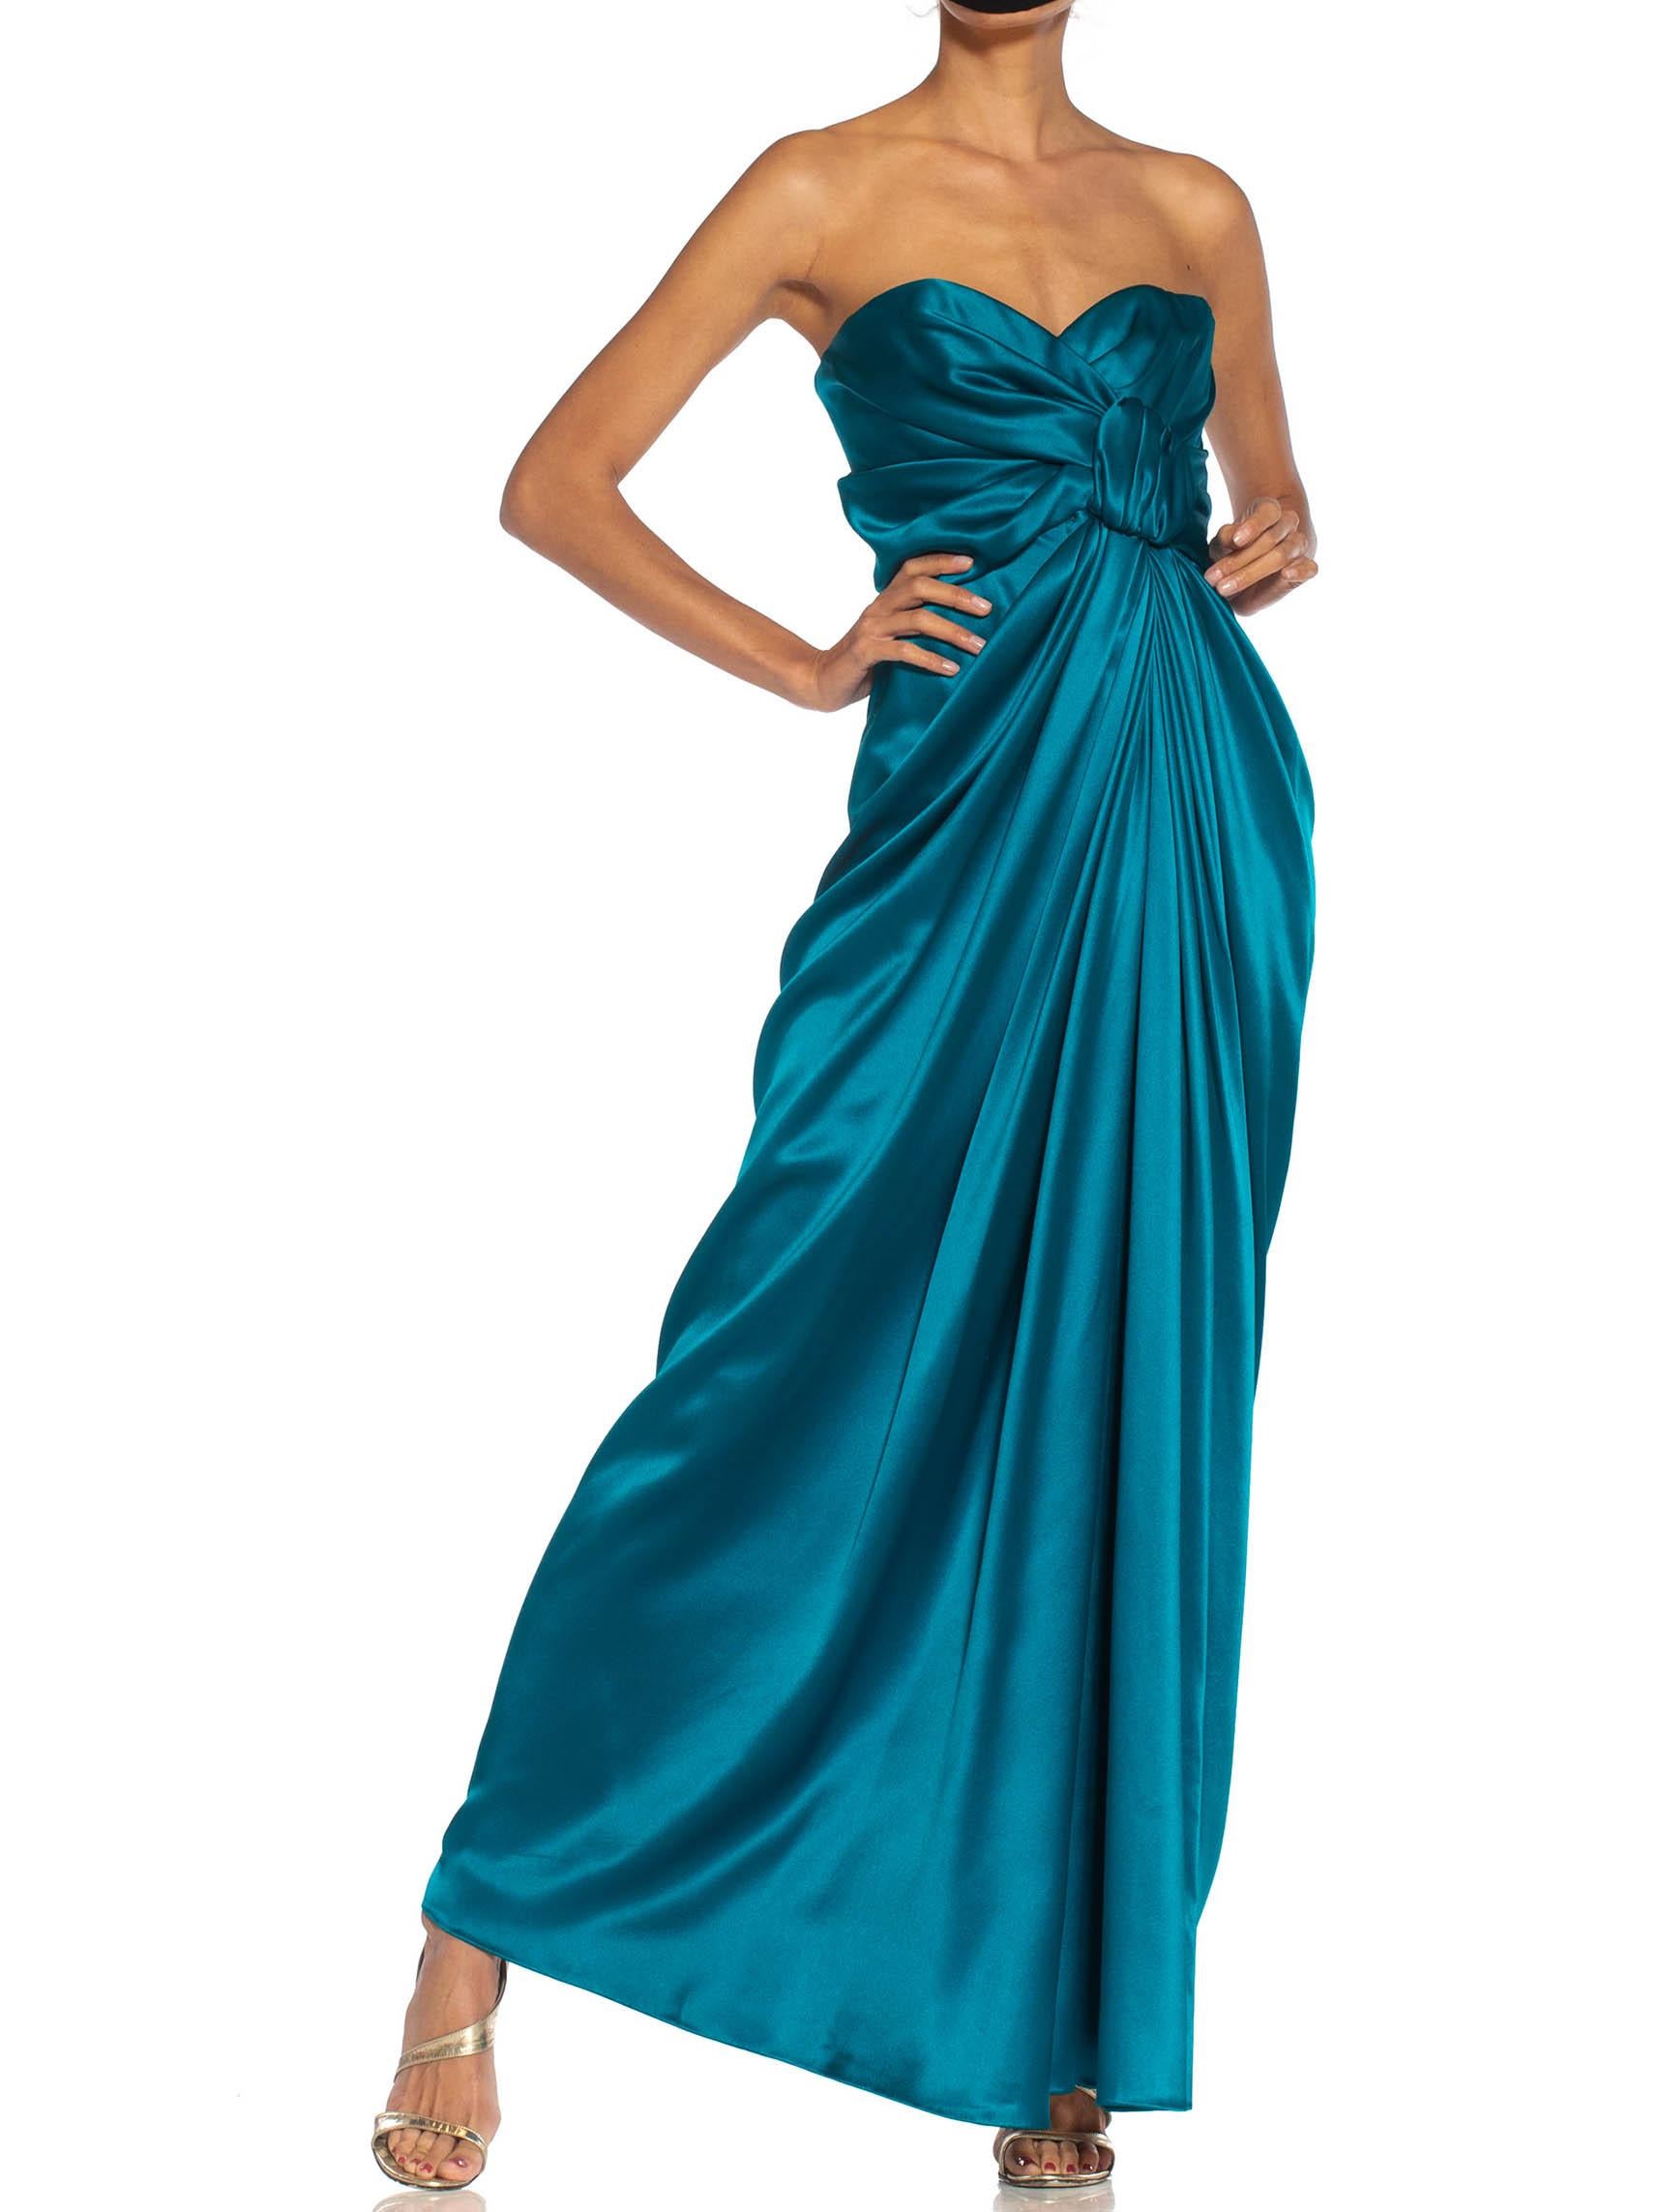 1980S YVES SAINT LAURENT Teal Haute Couture Silk Satin Draped Strpless Gown In Excellent Condition For Sale In New York, NY